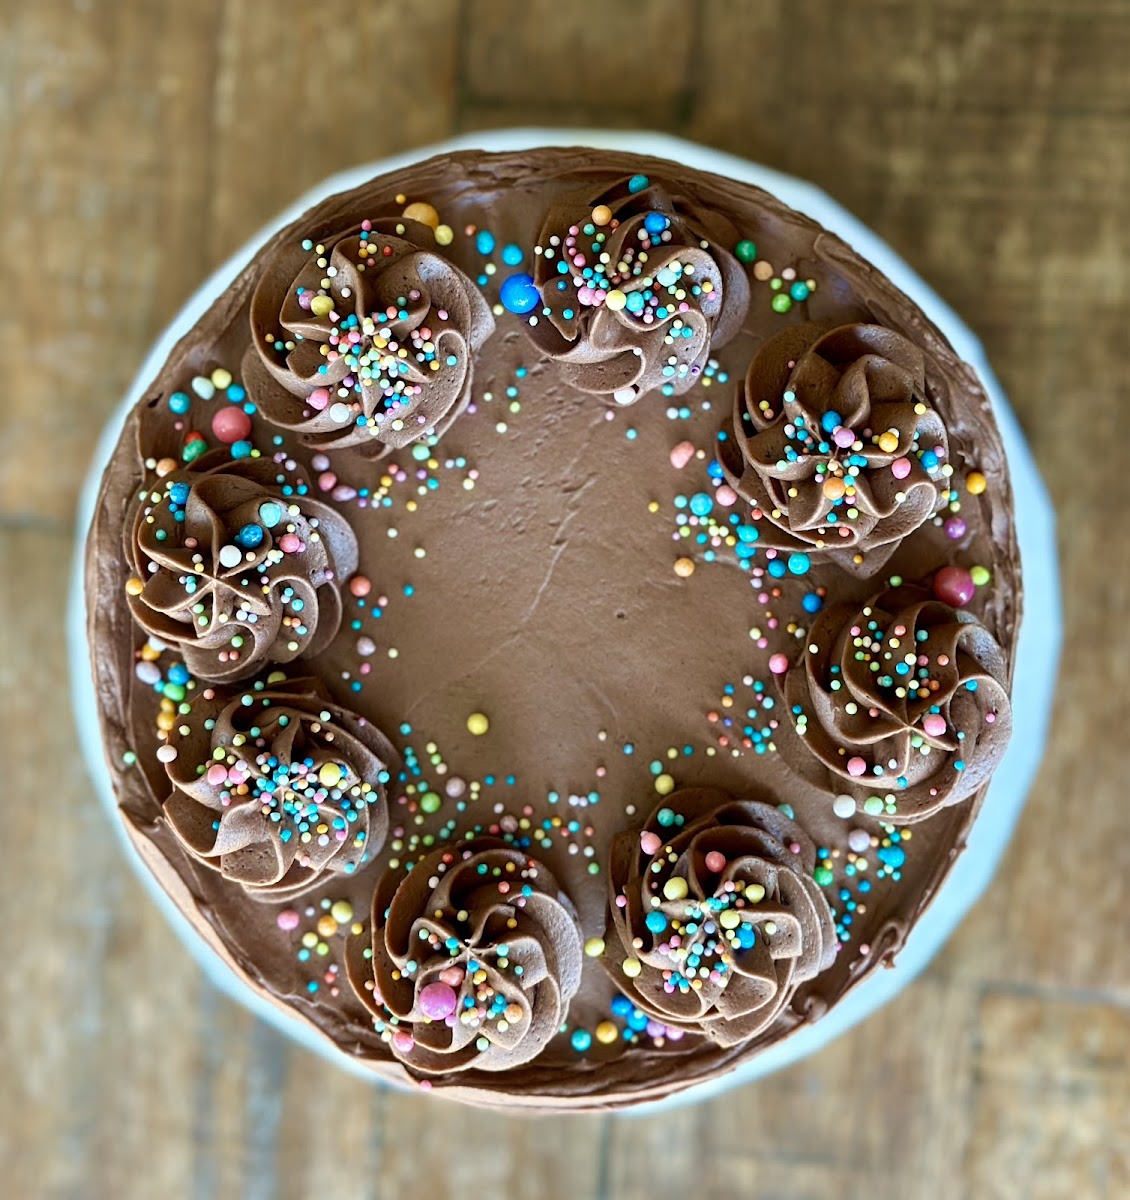 Chocolate Cake with chocolate frosting. (Gluten & Nut Free)